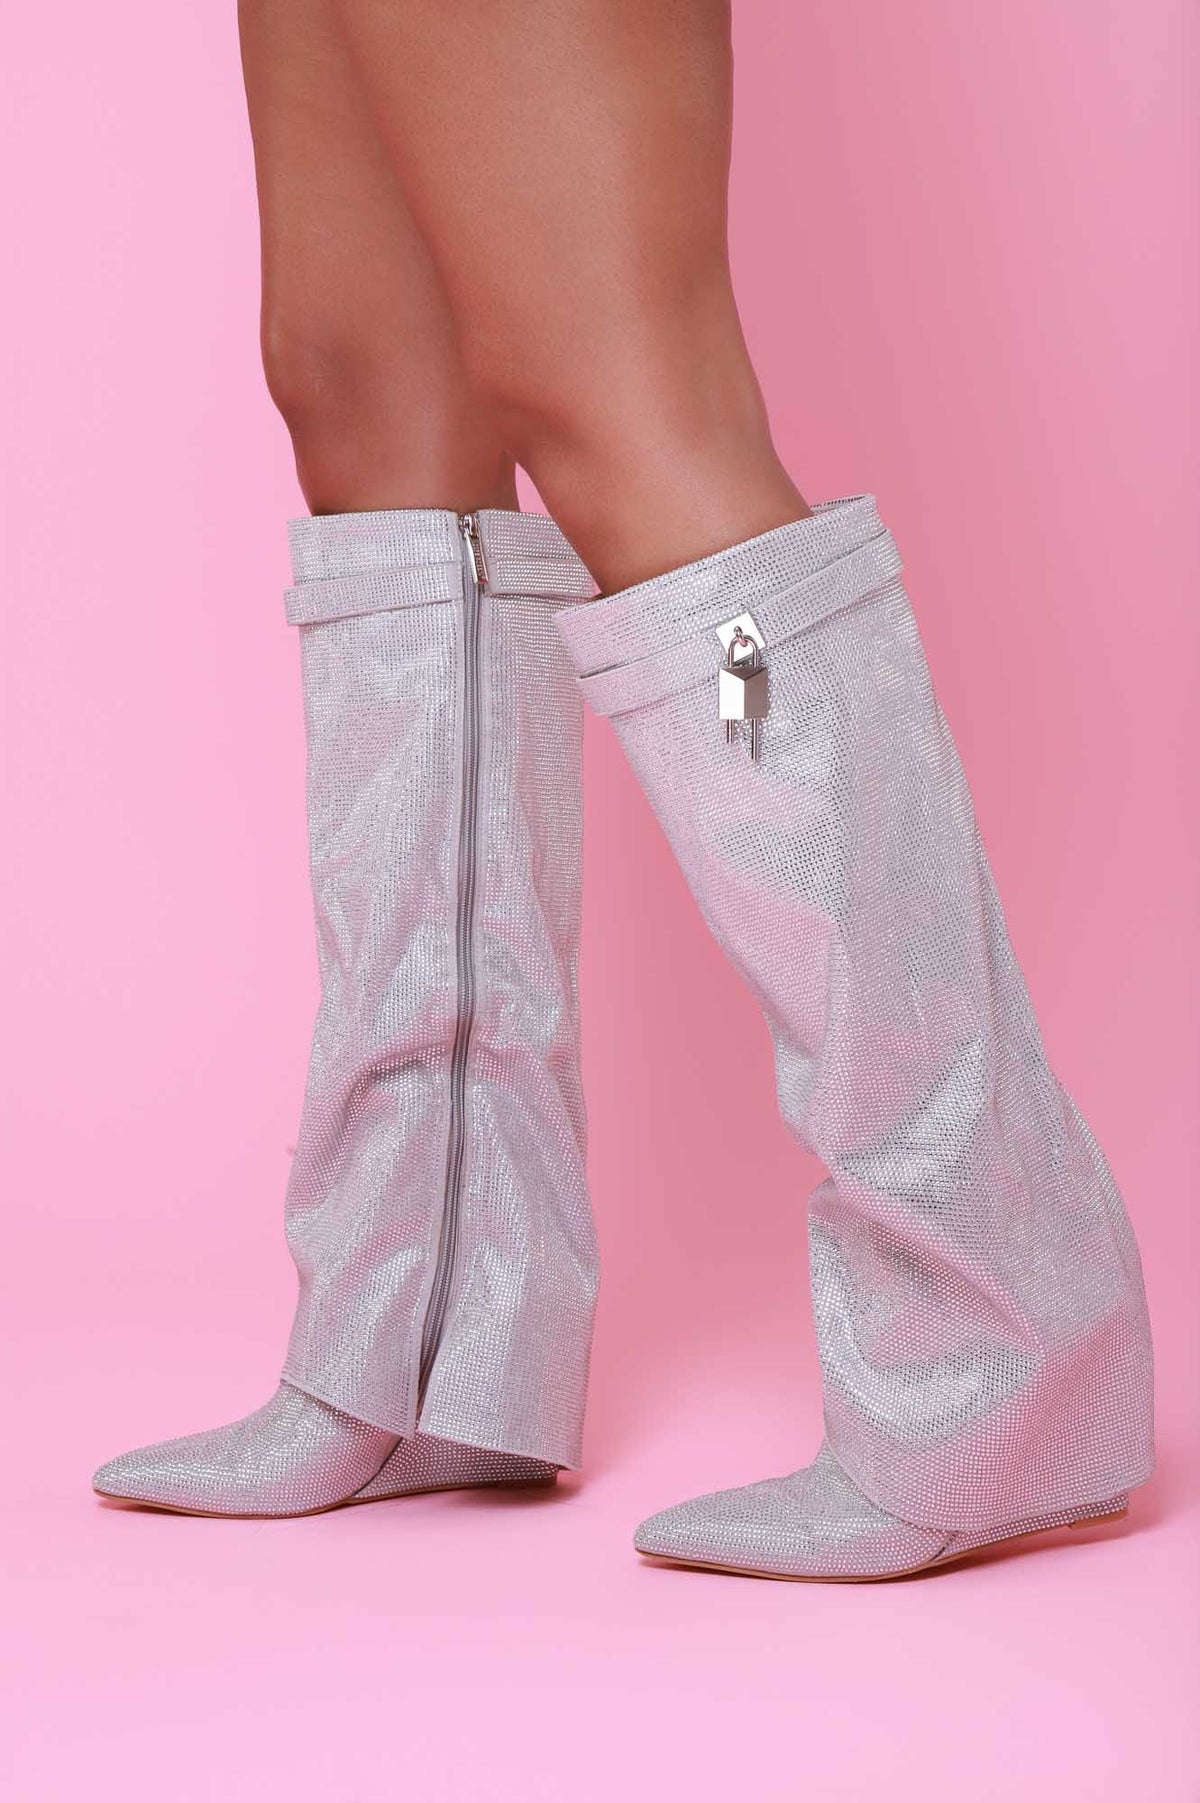 
              Special Effects Rhinestone Knee High Boots - Silver - Swank A Posh
            